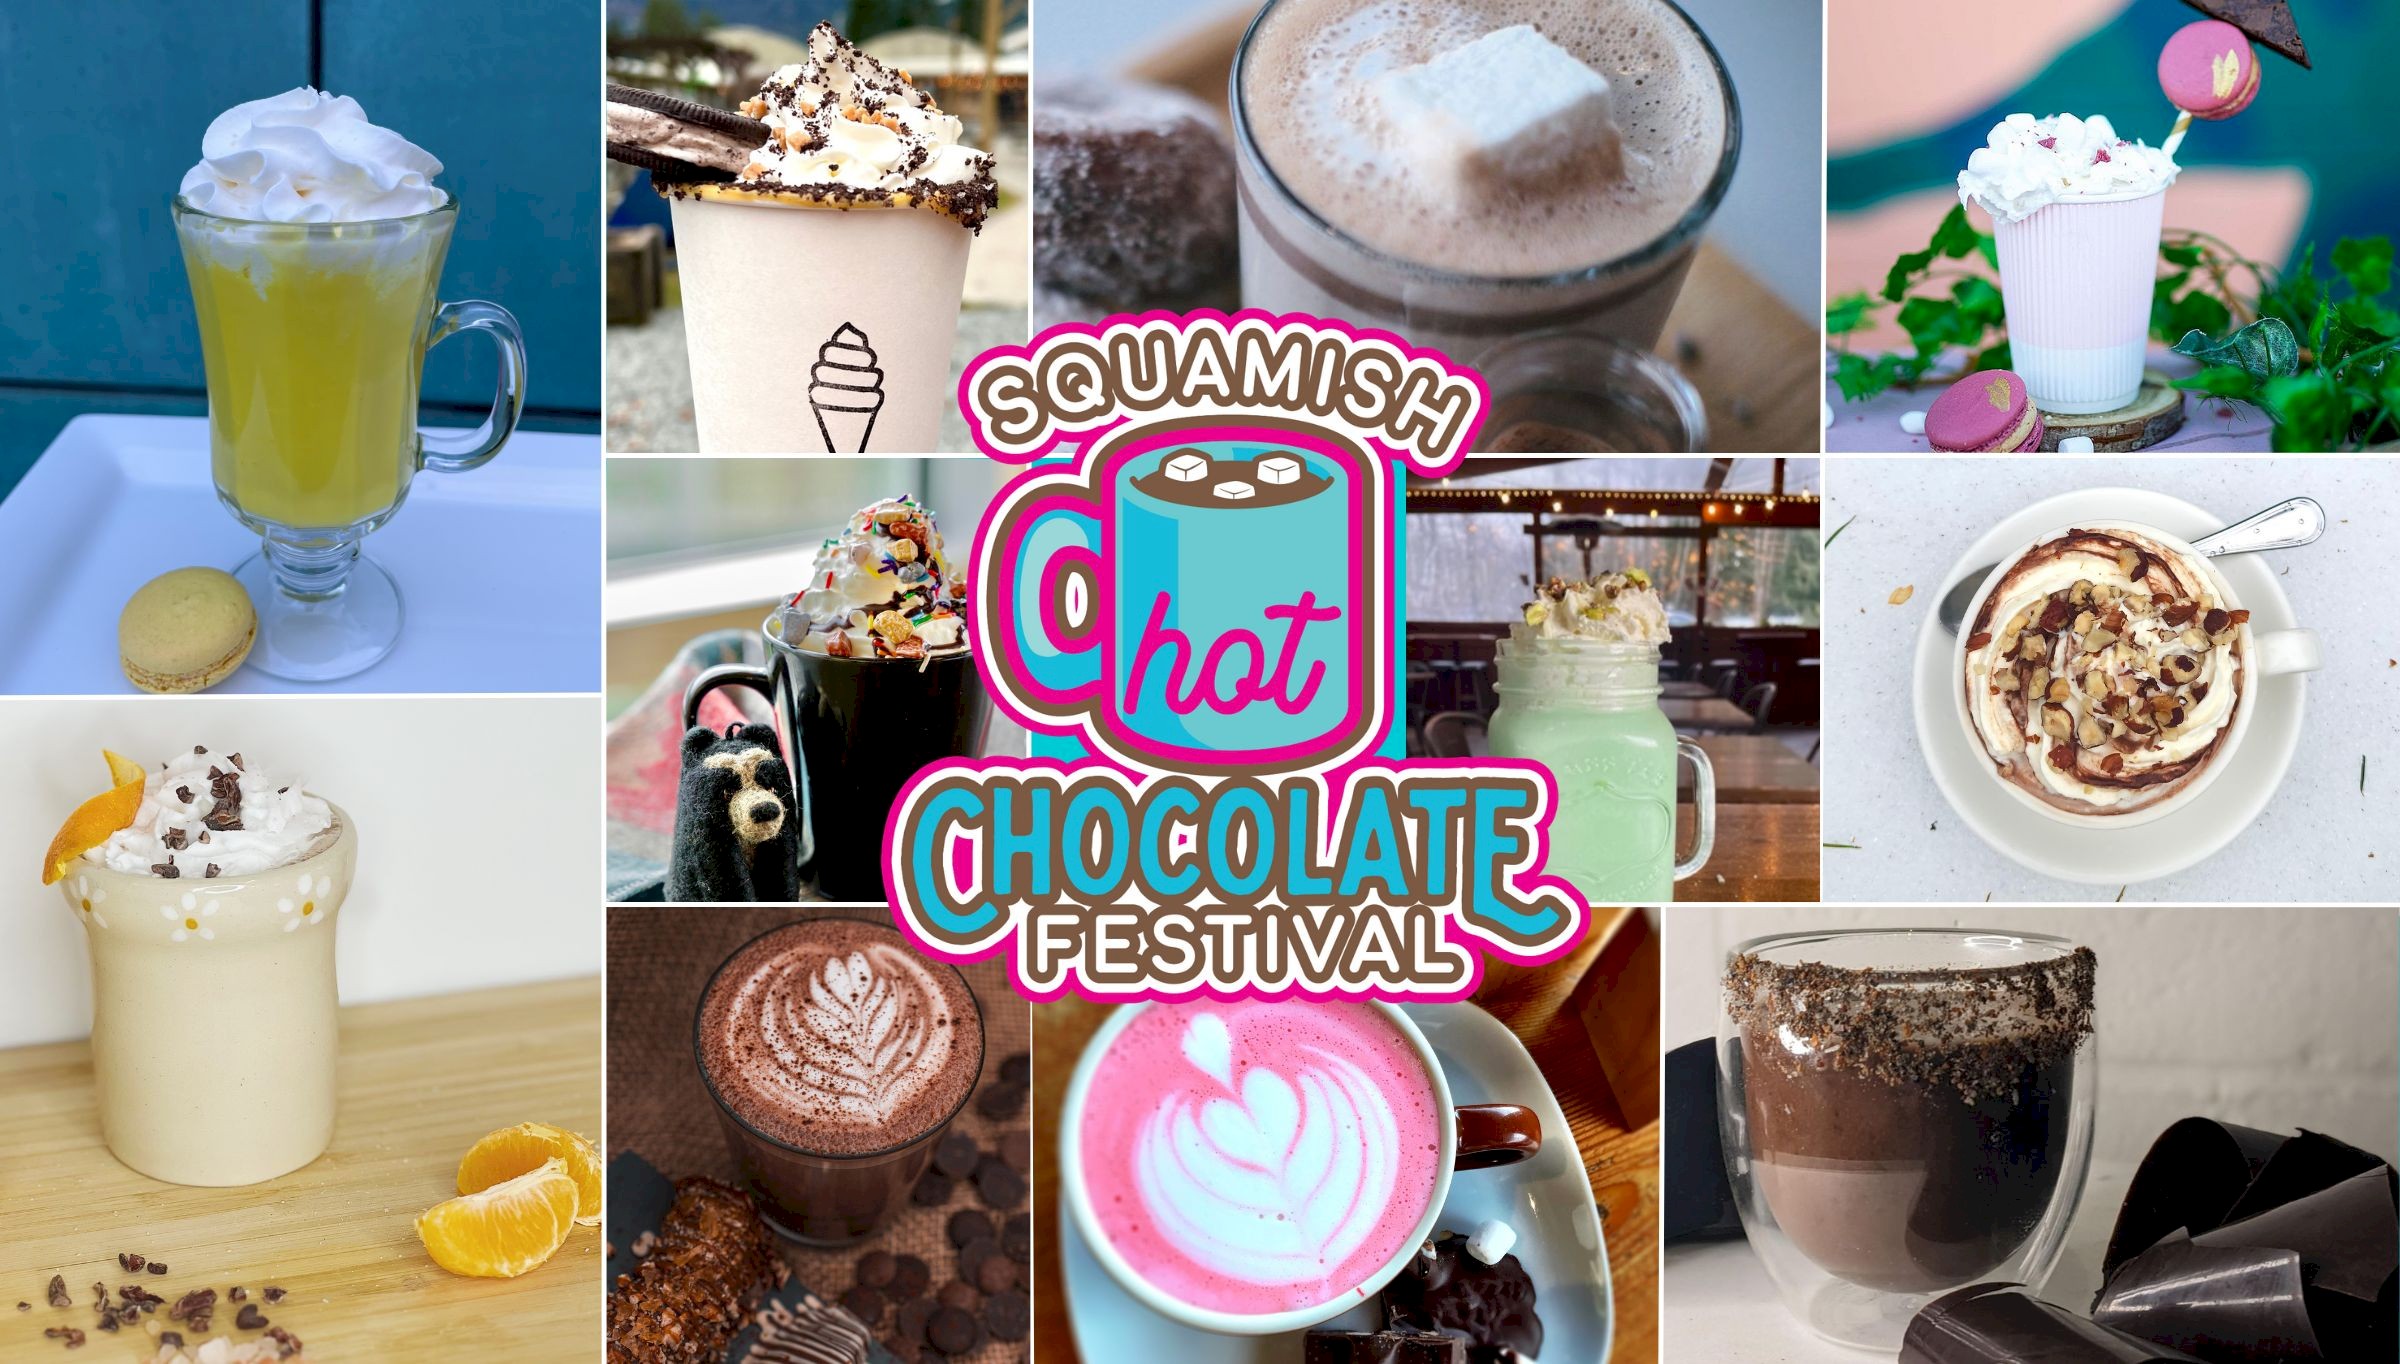 Your Guide to the Squamish Hot Chocolate Festival